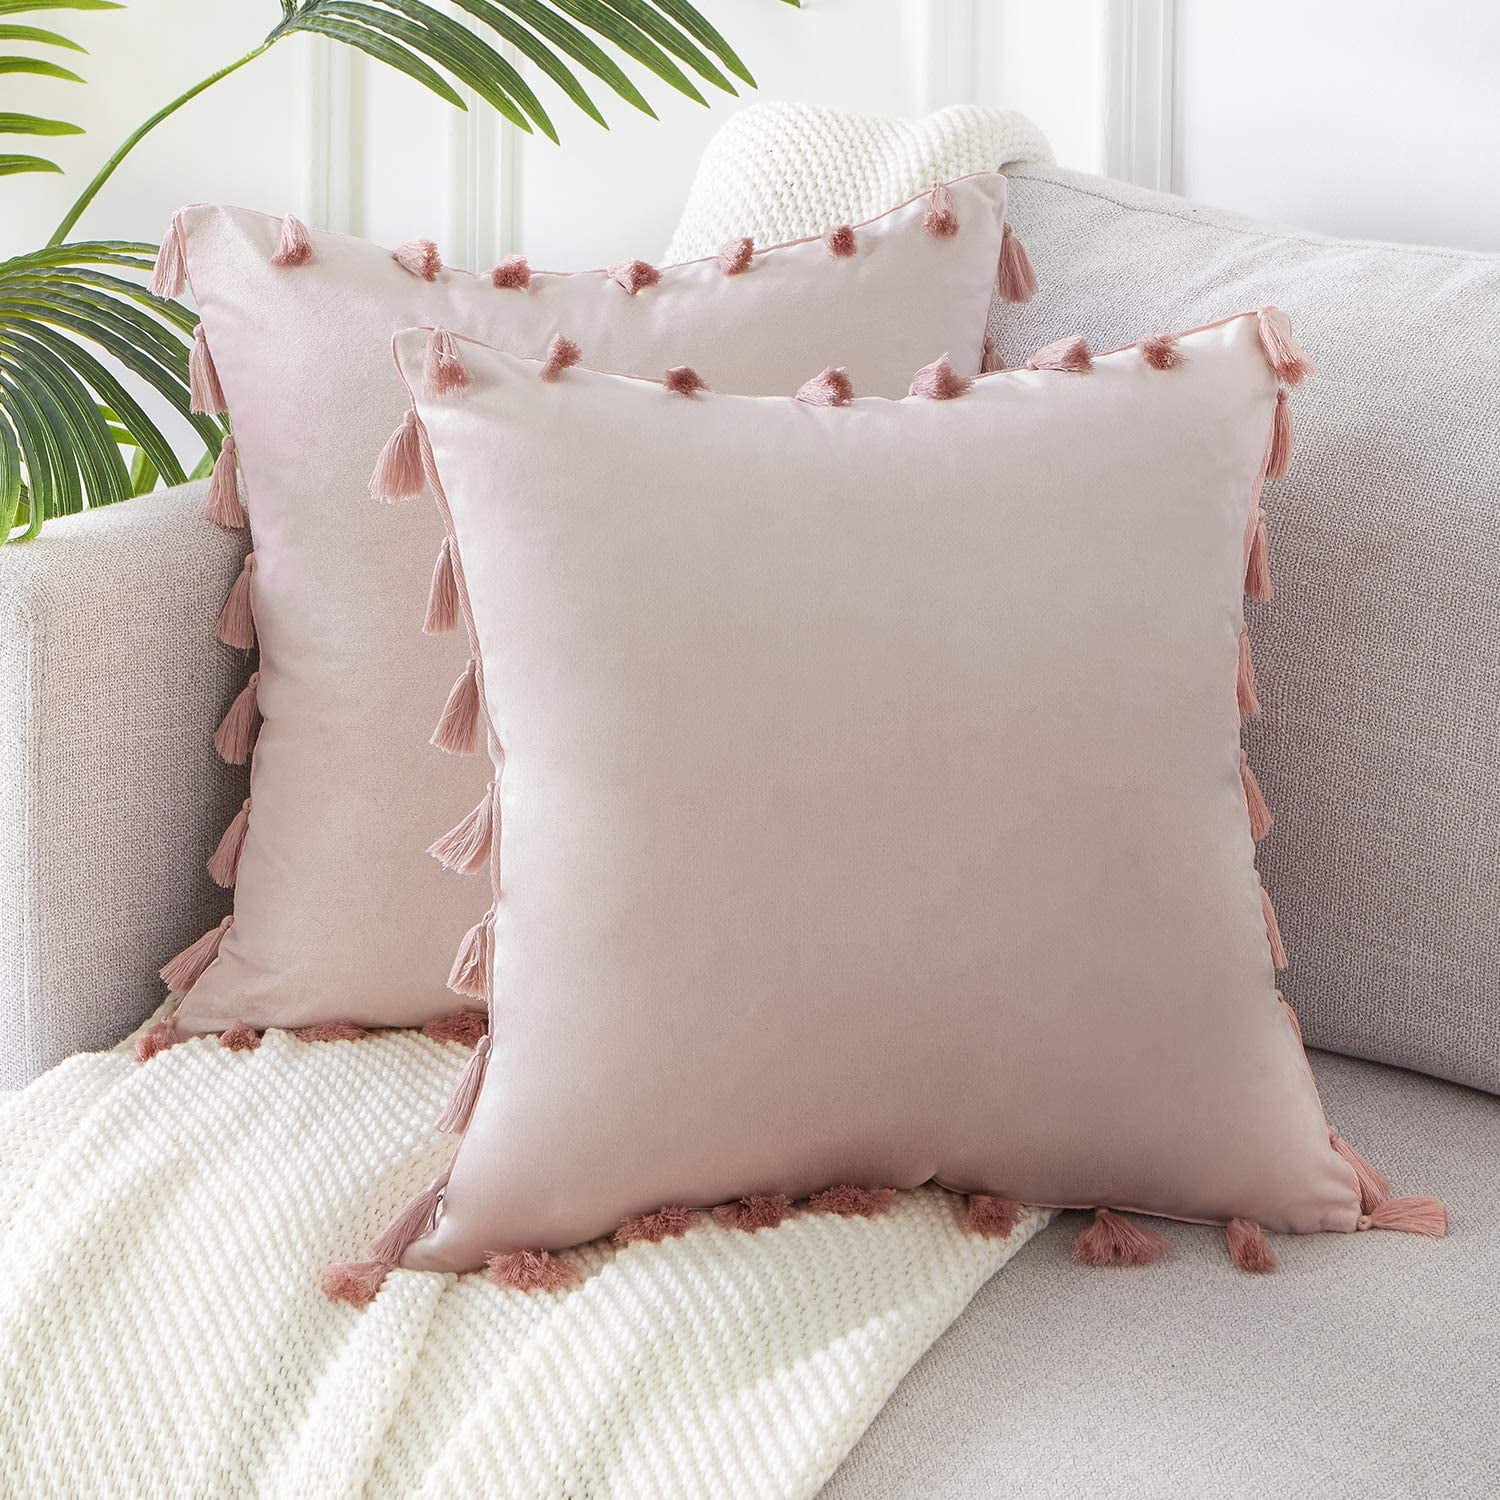 45cm x 45cm Throw Pillow Pink Ceramic Tile Motif Cushion Cover With Tassels